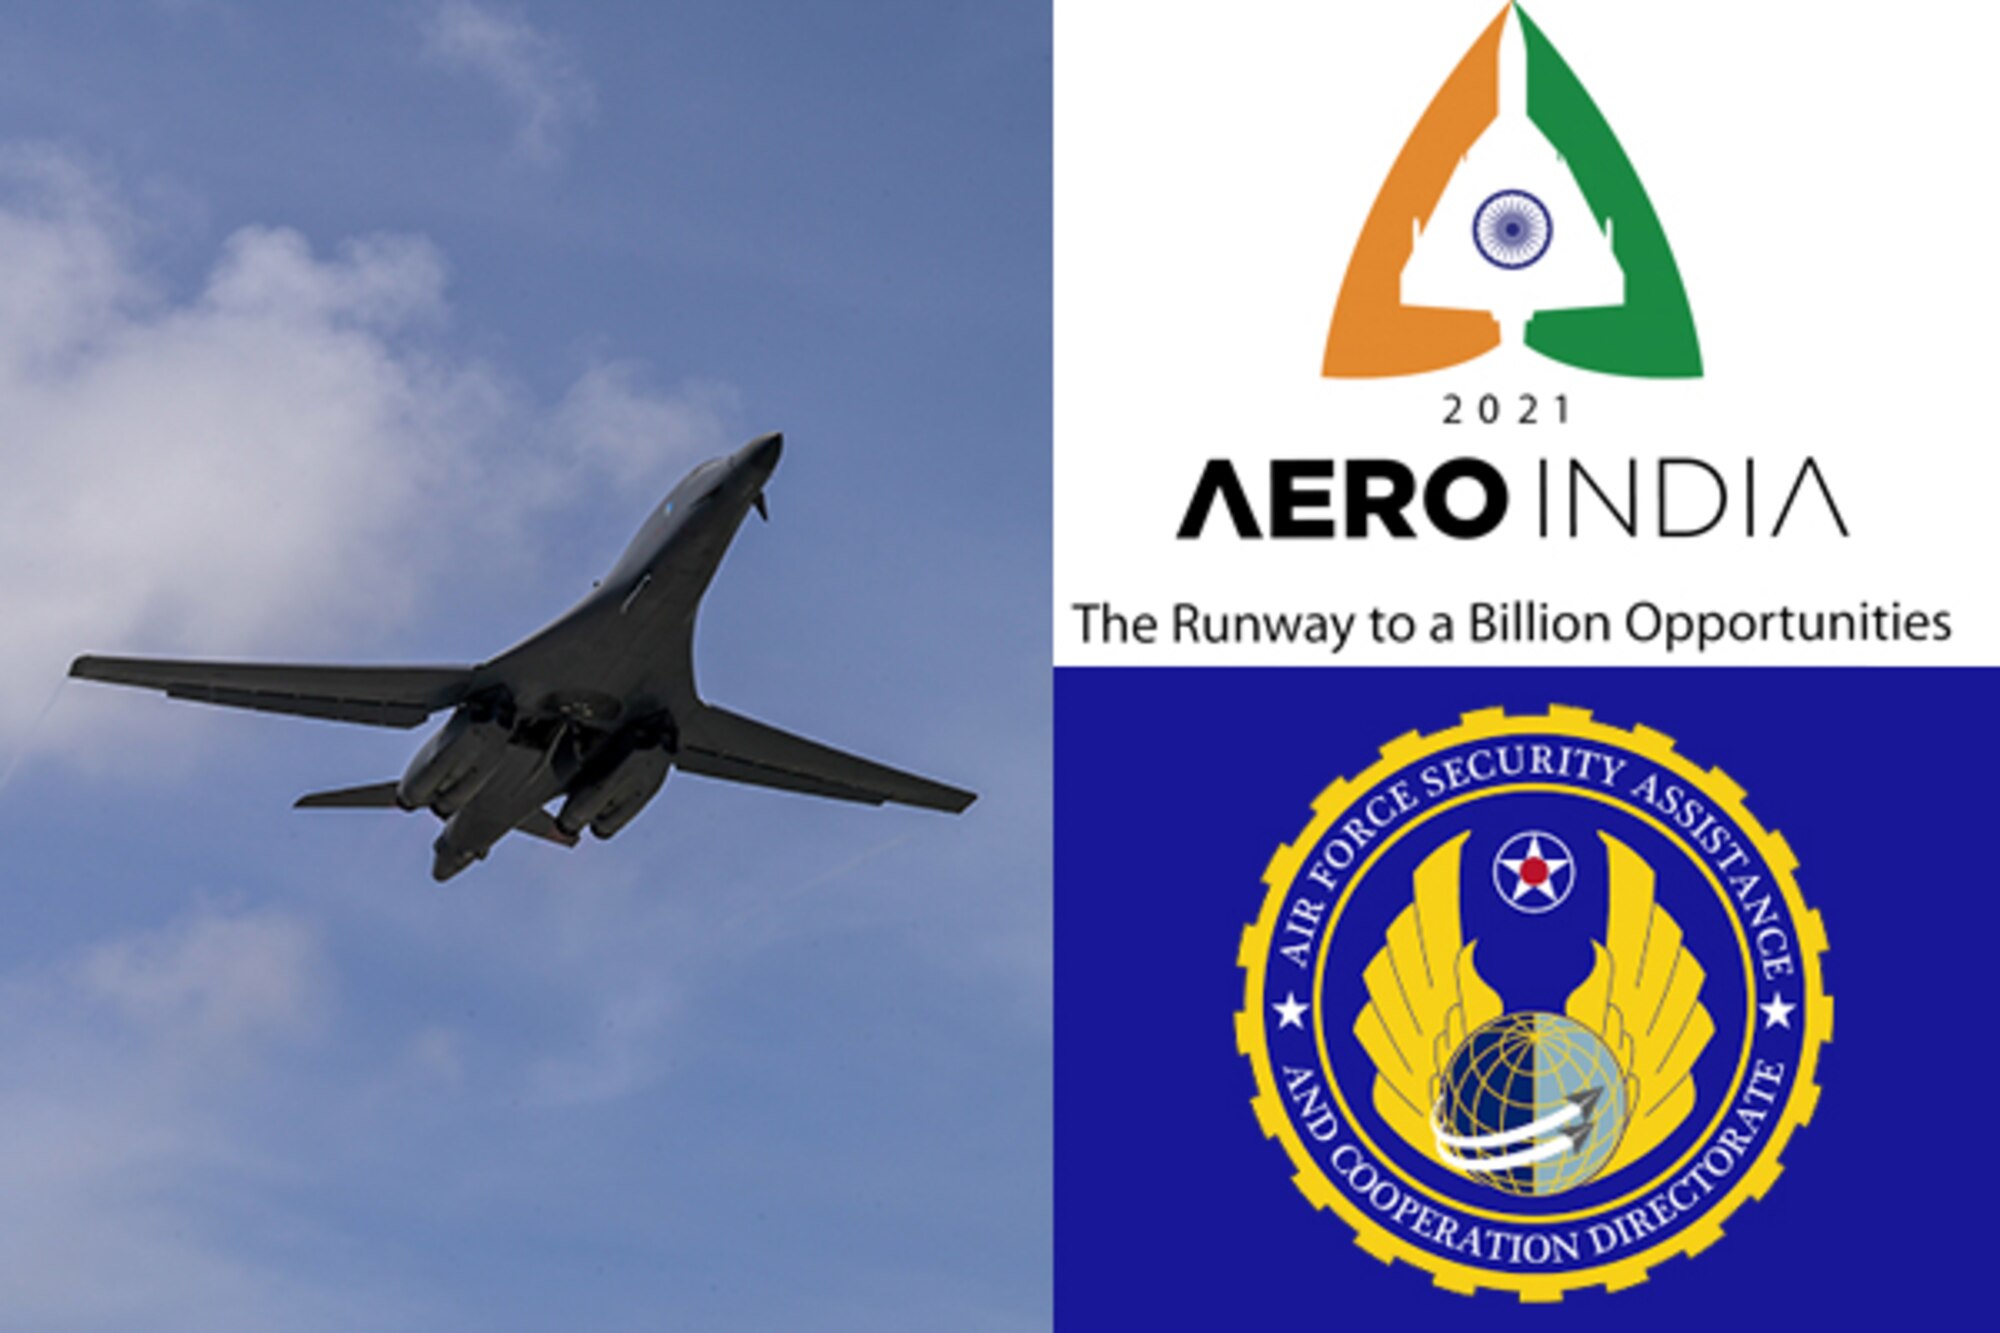 : The Air Force Security Assistance and Cooperation (AFSAC) Directorate joins a United States Air Force (USAF) Delegation to attend Aero India 2021, discussing military interoperability and foreign military sales strategy for the U.S.-India bilateral partnership. Aero India 2021 was also a significant milestone for the USAF with the B-1B being on Indian ground since 75 years ago.